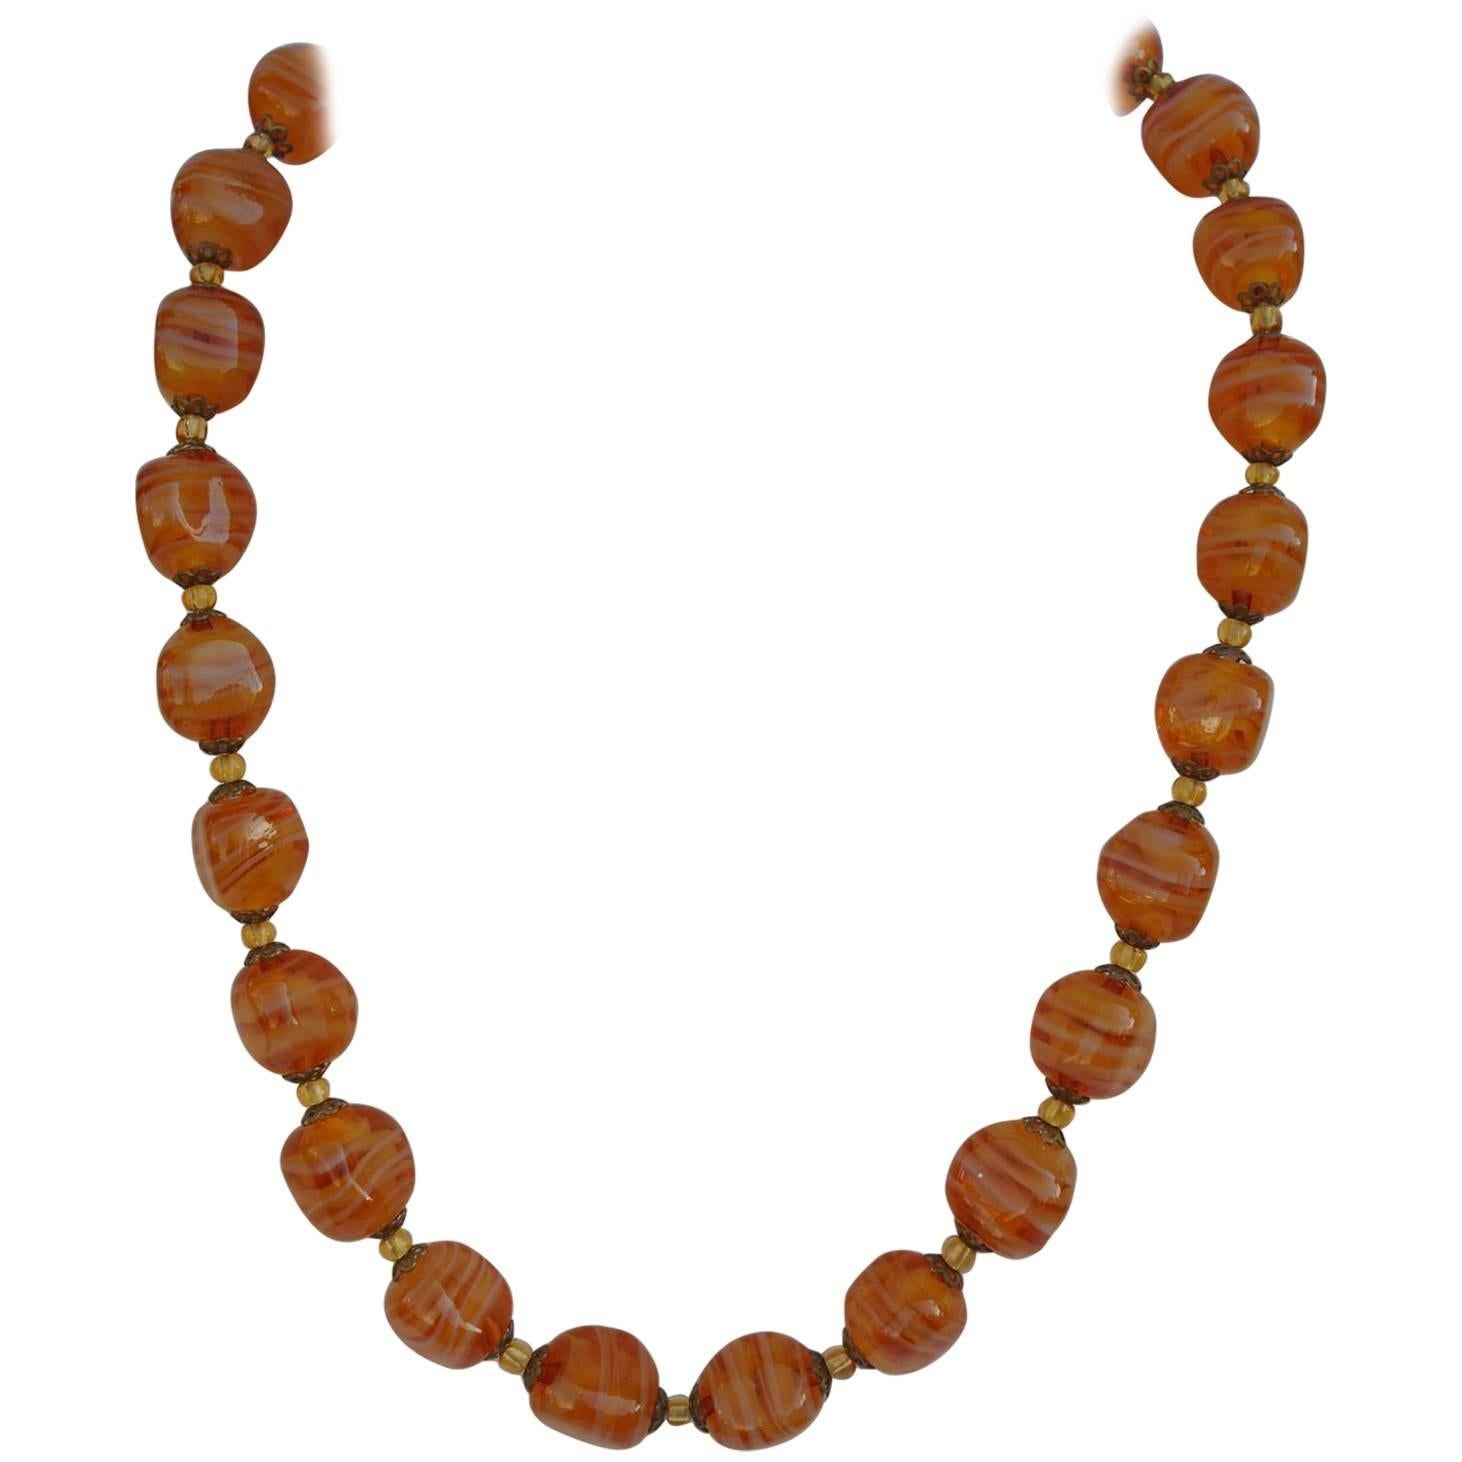 Amber-Tone Glass Beads with Silver Hardware Necklace For Sale